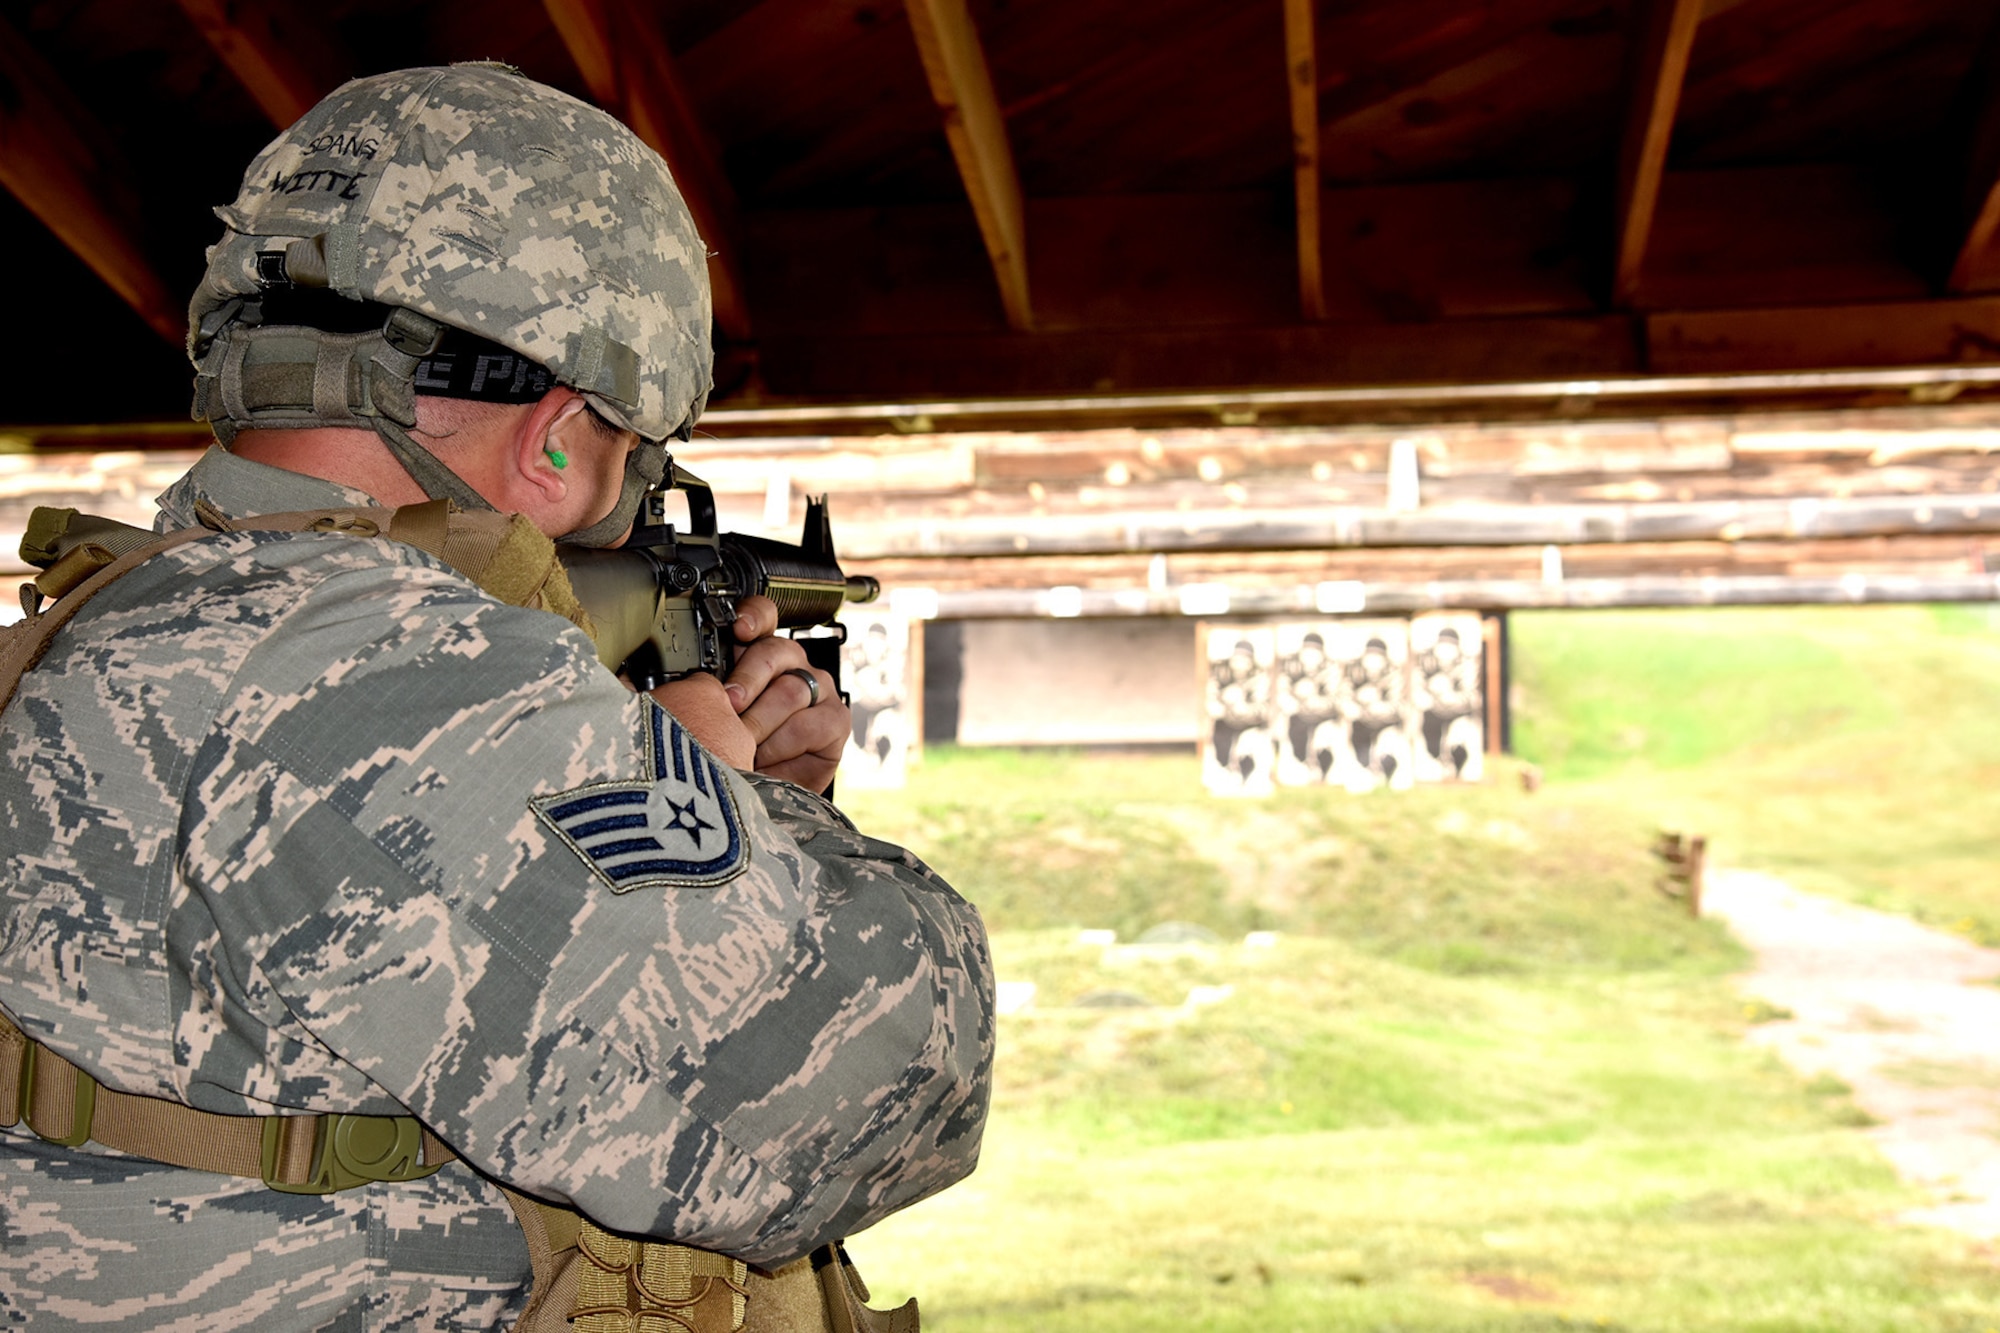 Staff Sgt. Adam Witte, 114th Maintenance Squadron electronic countermeasures technician, participates in The State Command Sergeant Major’s Outdoor Match May 18, 2018 at Camp Rapid, S.D.